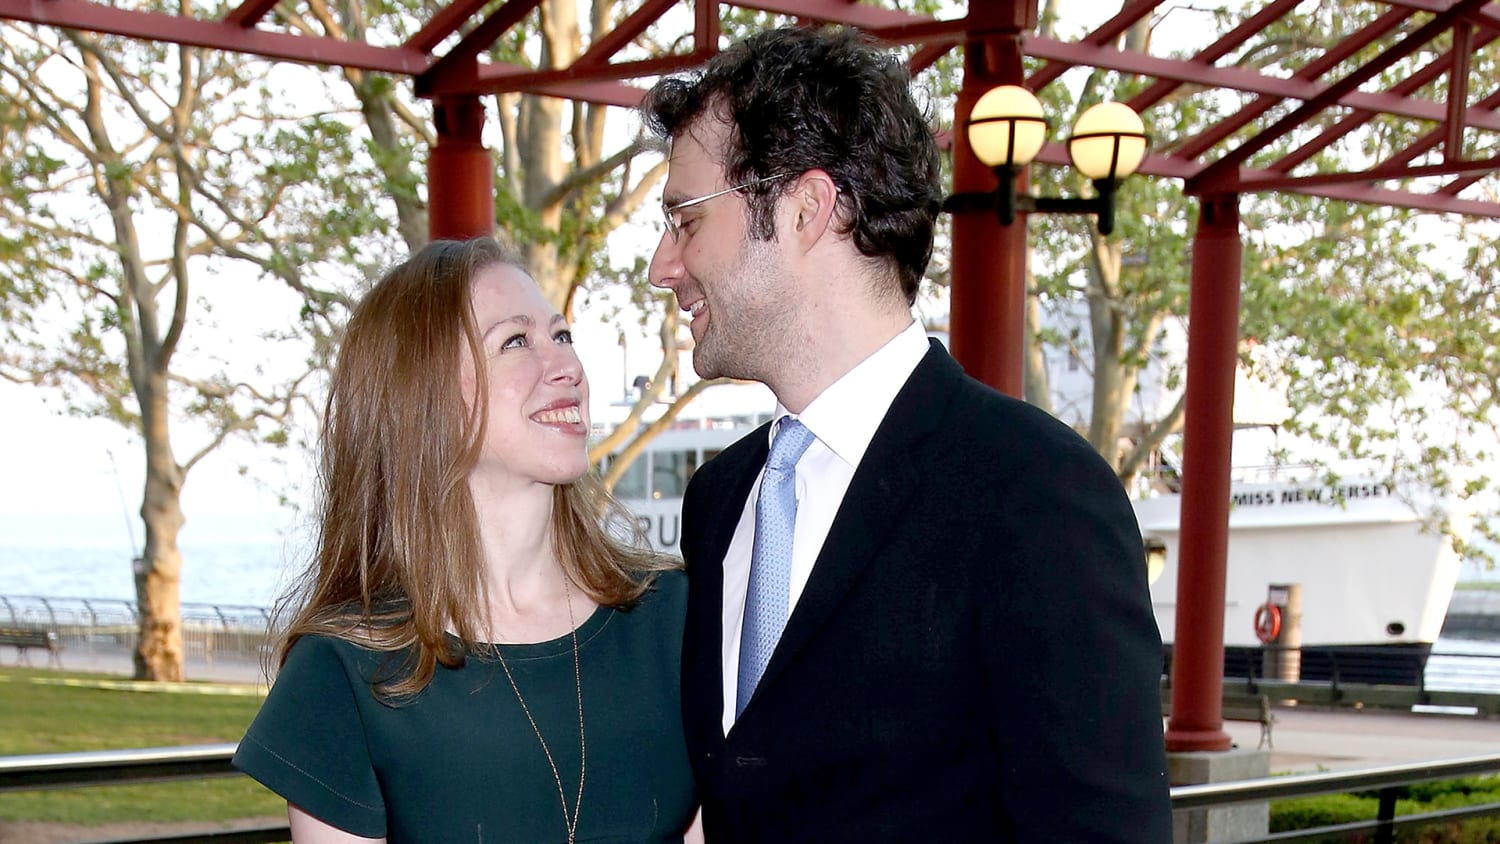 Chelsea Clinton Charlotte Clinton Mezvinsky / Chelsea Clinton Gives Birth To Baby Daughter Charlotte Clinton Mezvinsky Daily Mail Online - President bill clinton and former u.s.